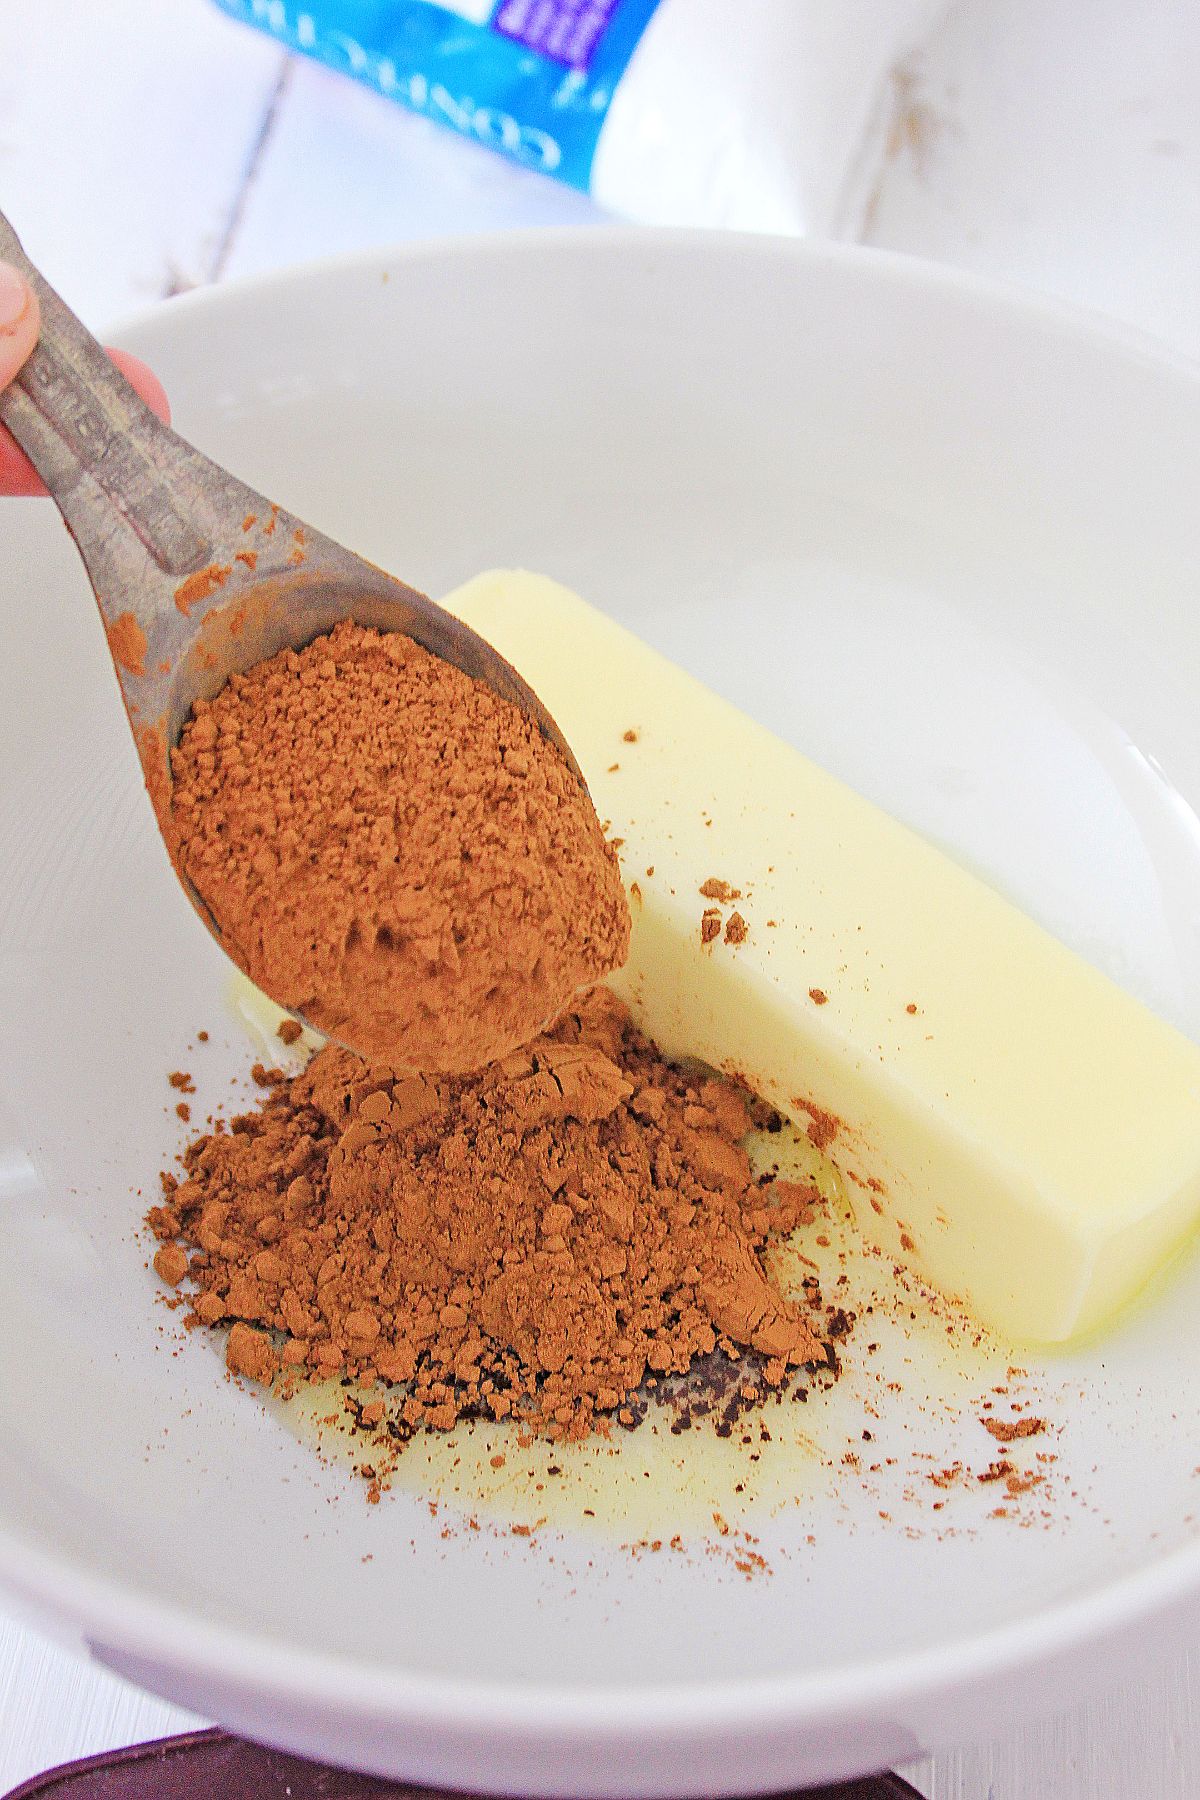 Ingredients  being combined in a white mixing bowl to make an icing.